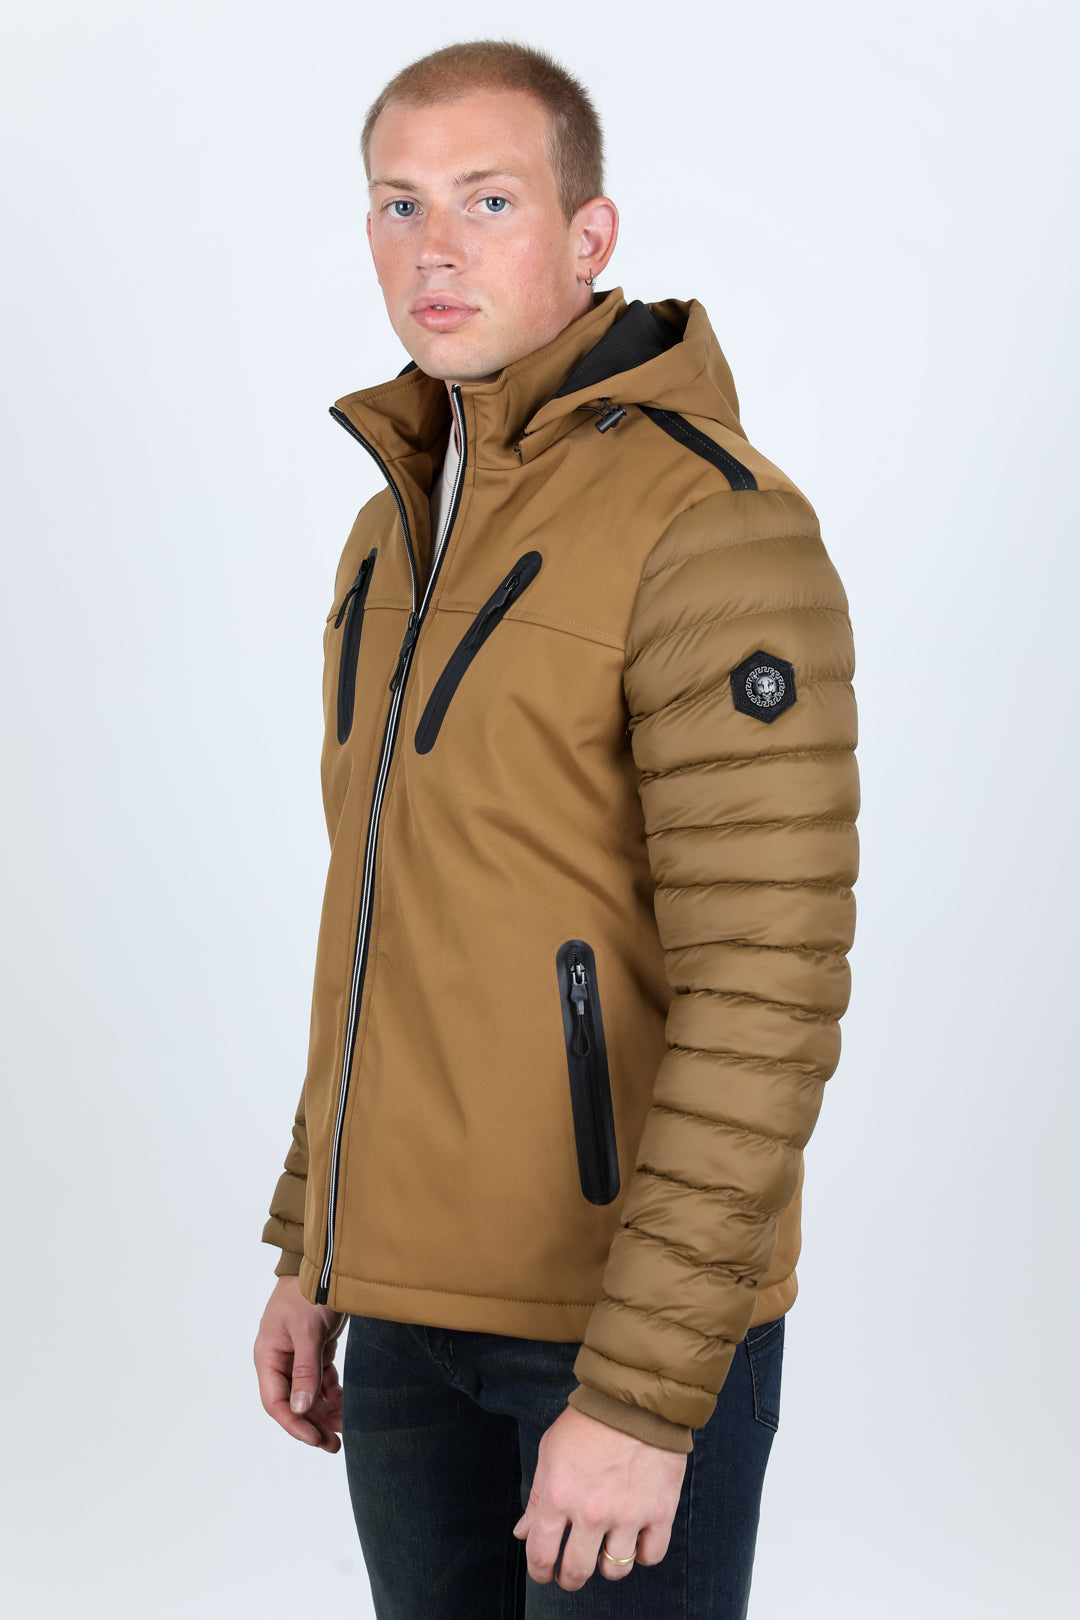 Men's Insulated Lightweight Water-Resistant Softshell Jacket - Camel